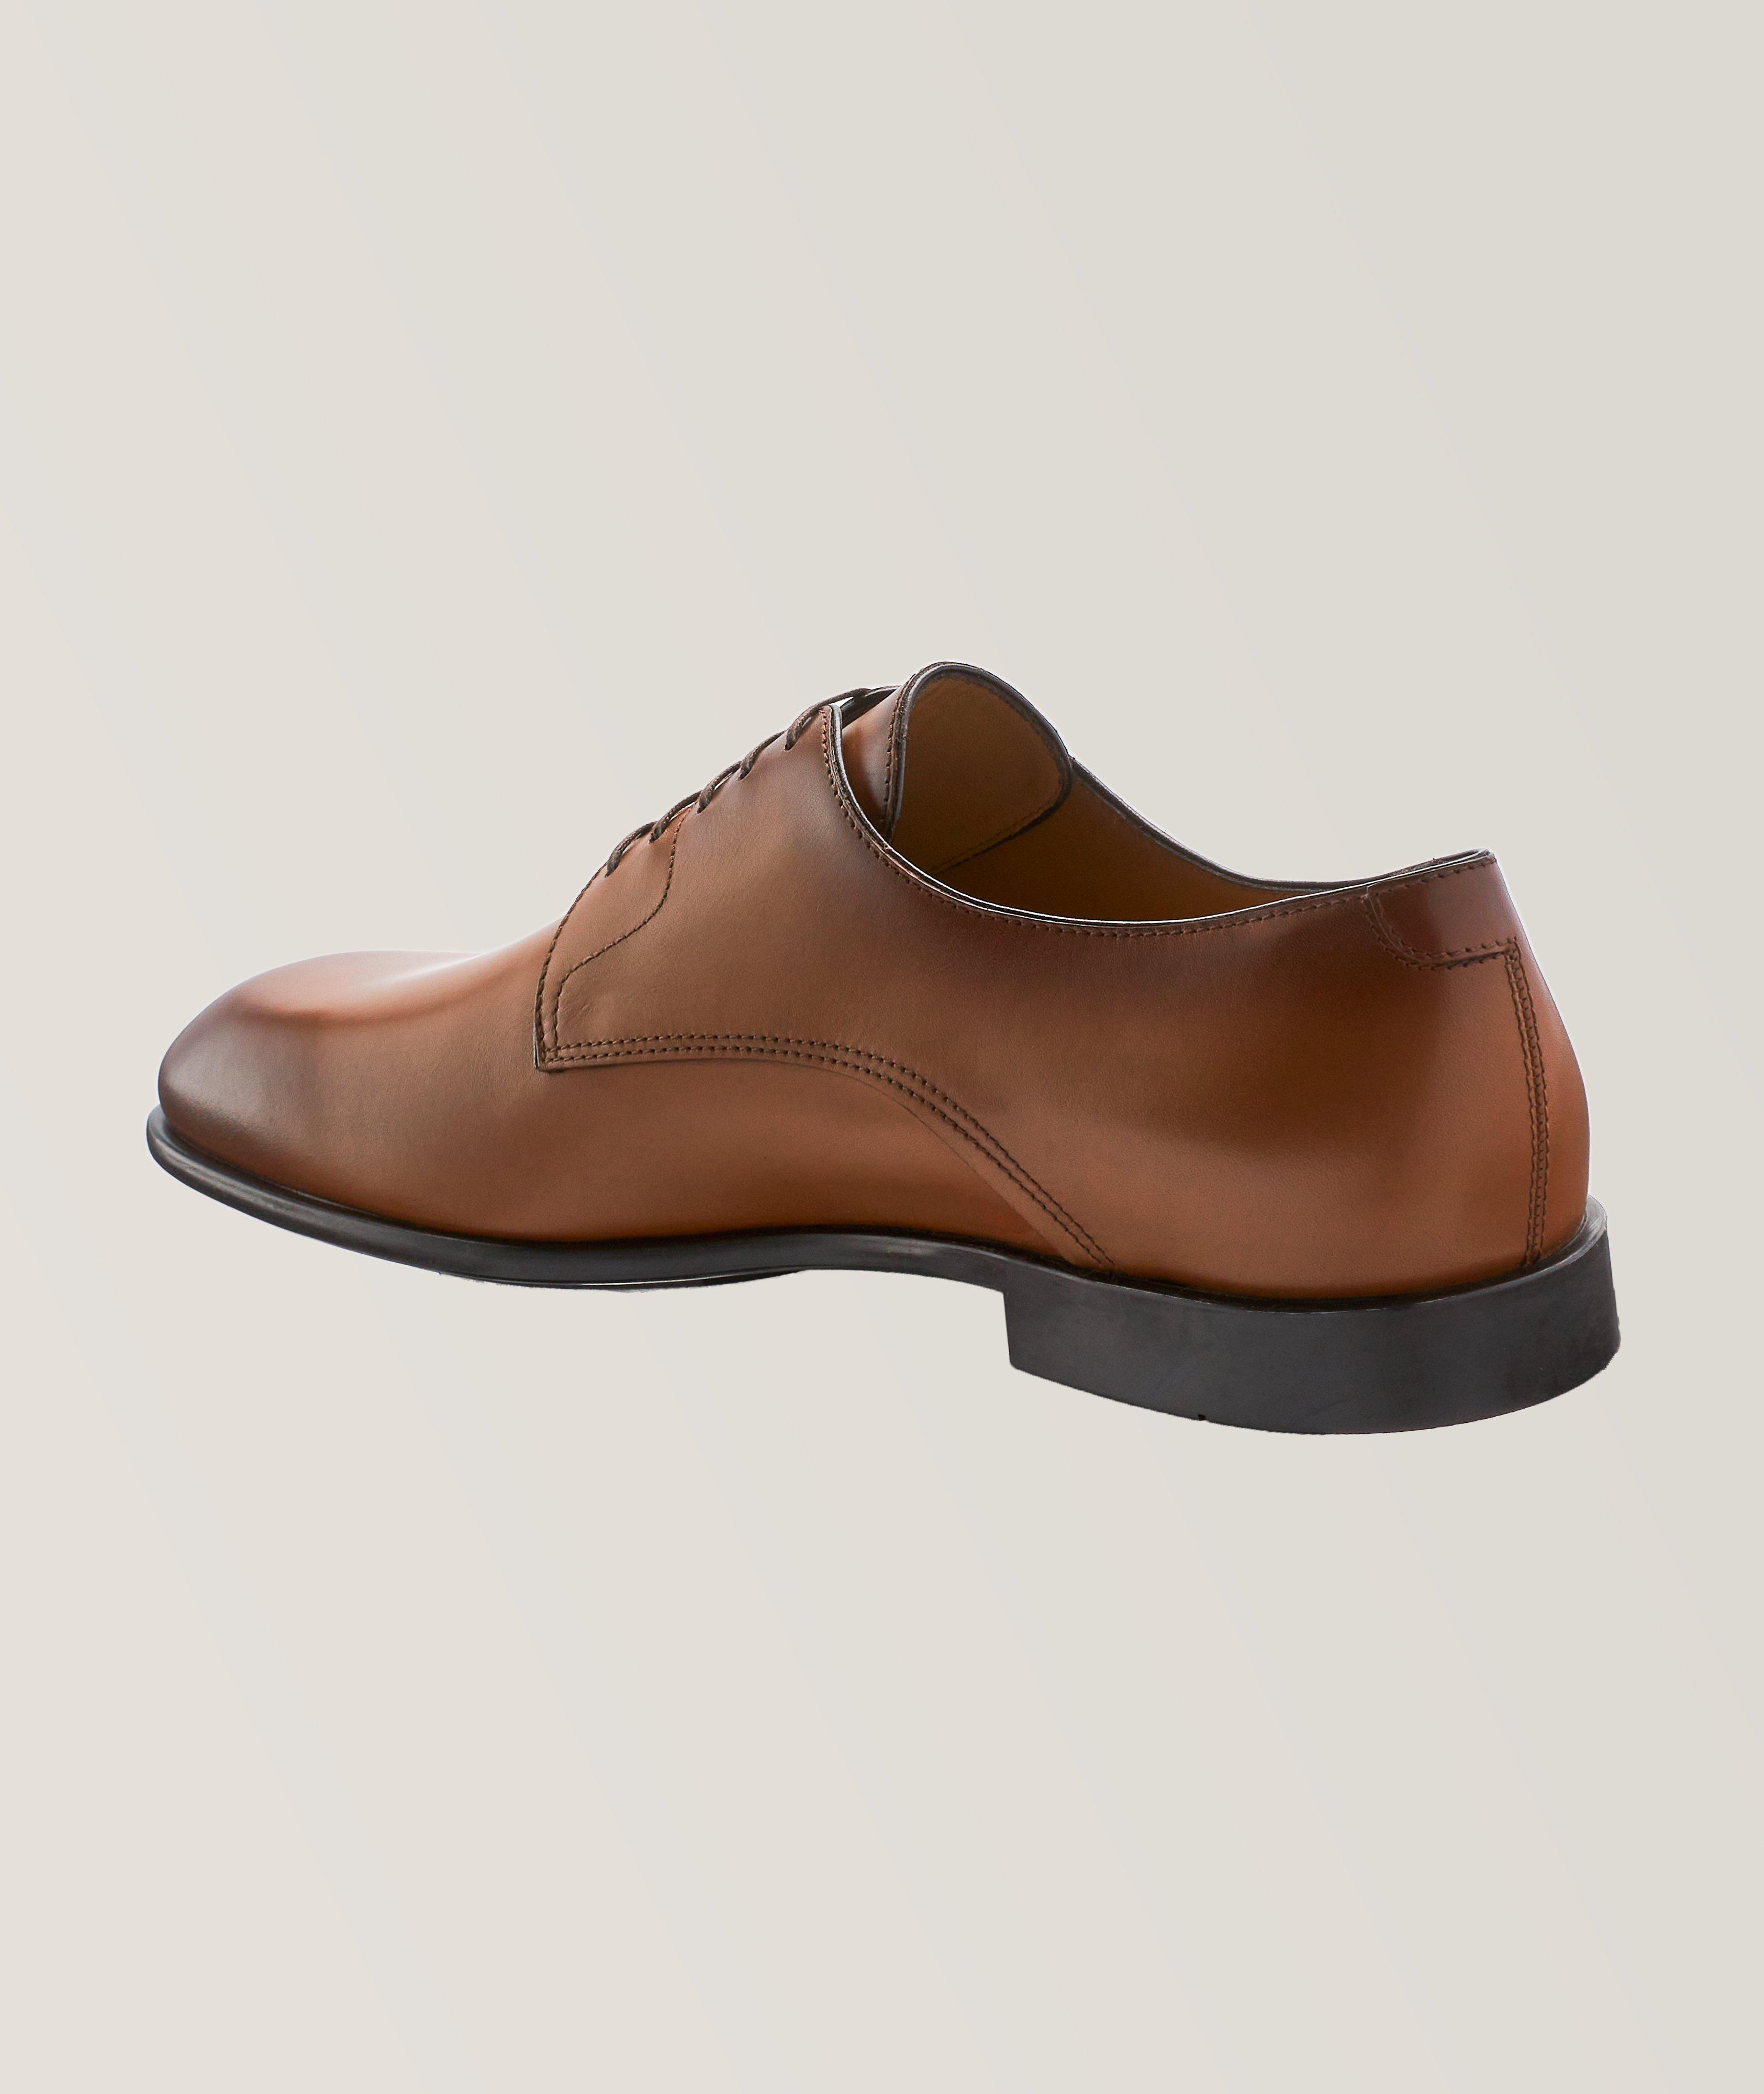 Fosco Lace-Up Leather Derbies image 1